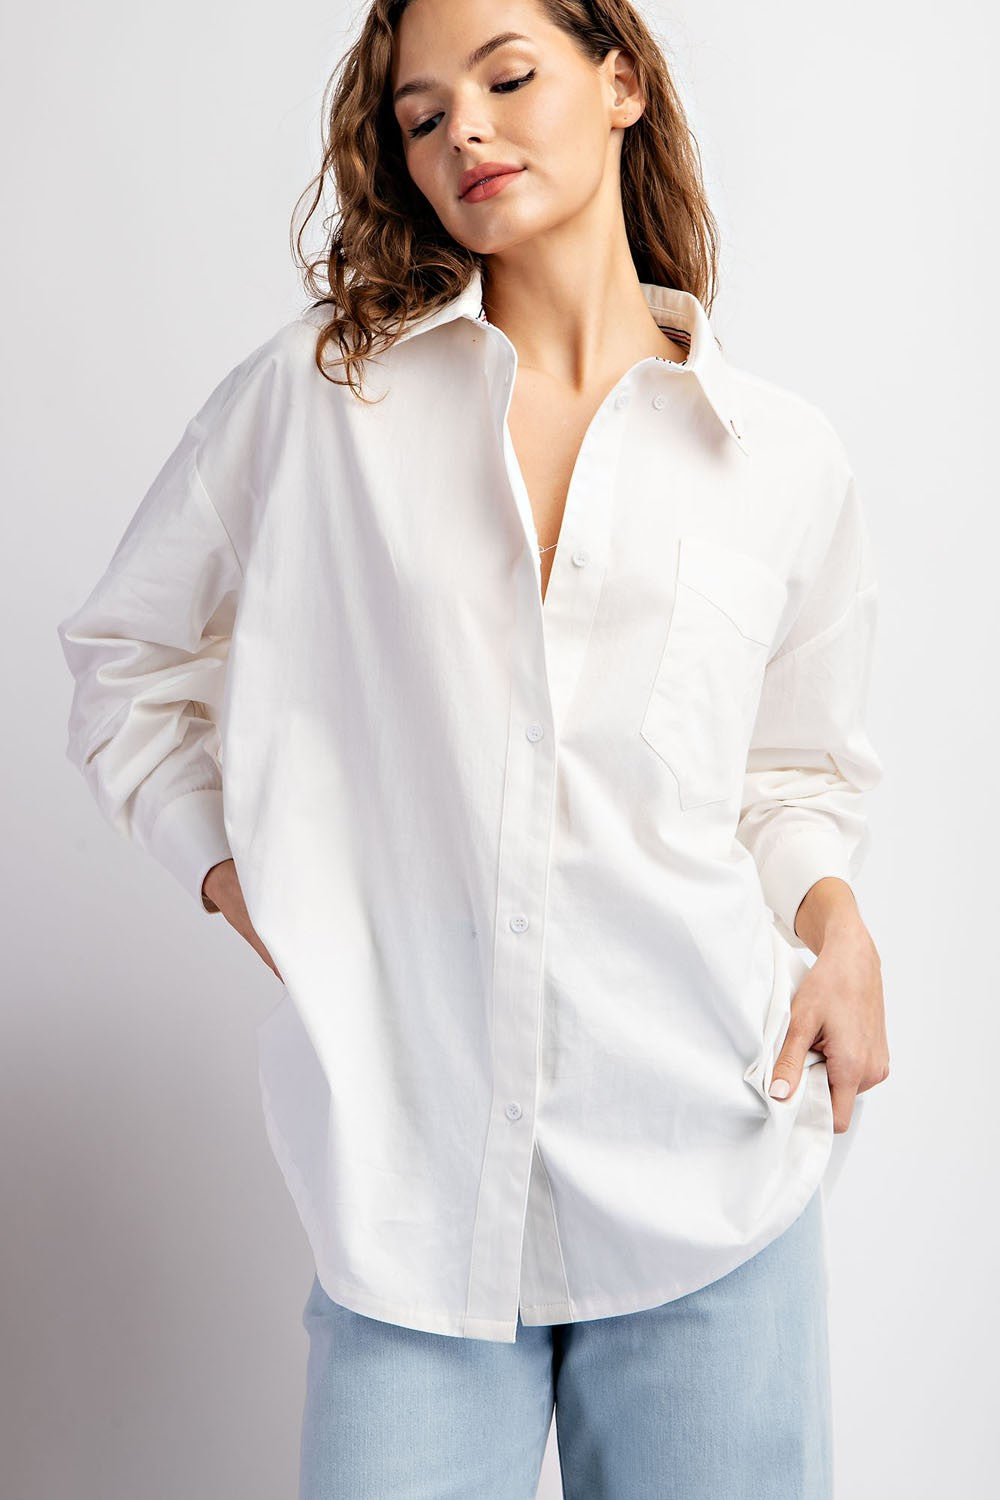 CLASSIC WHITE LONG SLEEVE BUTTON DOWN TOP